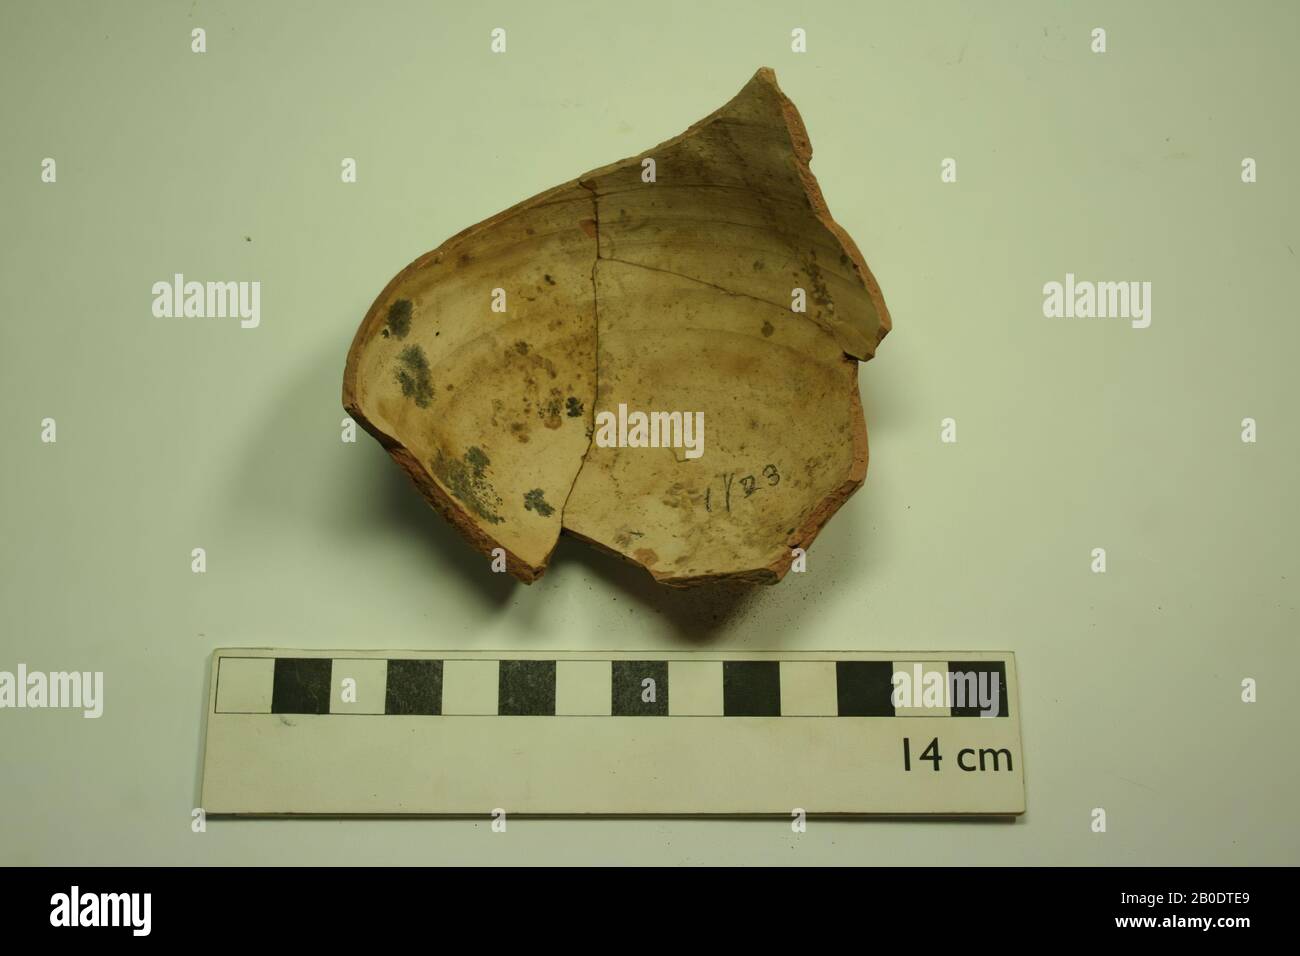 Egypt, fragment, bowl, earthenware, 7.5 x 9 cm, Meroitic Period, 2nd-4th century A.D, Egypt Stock Photo